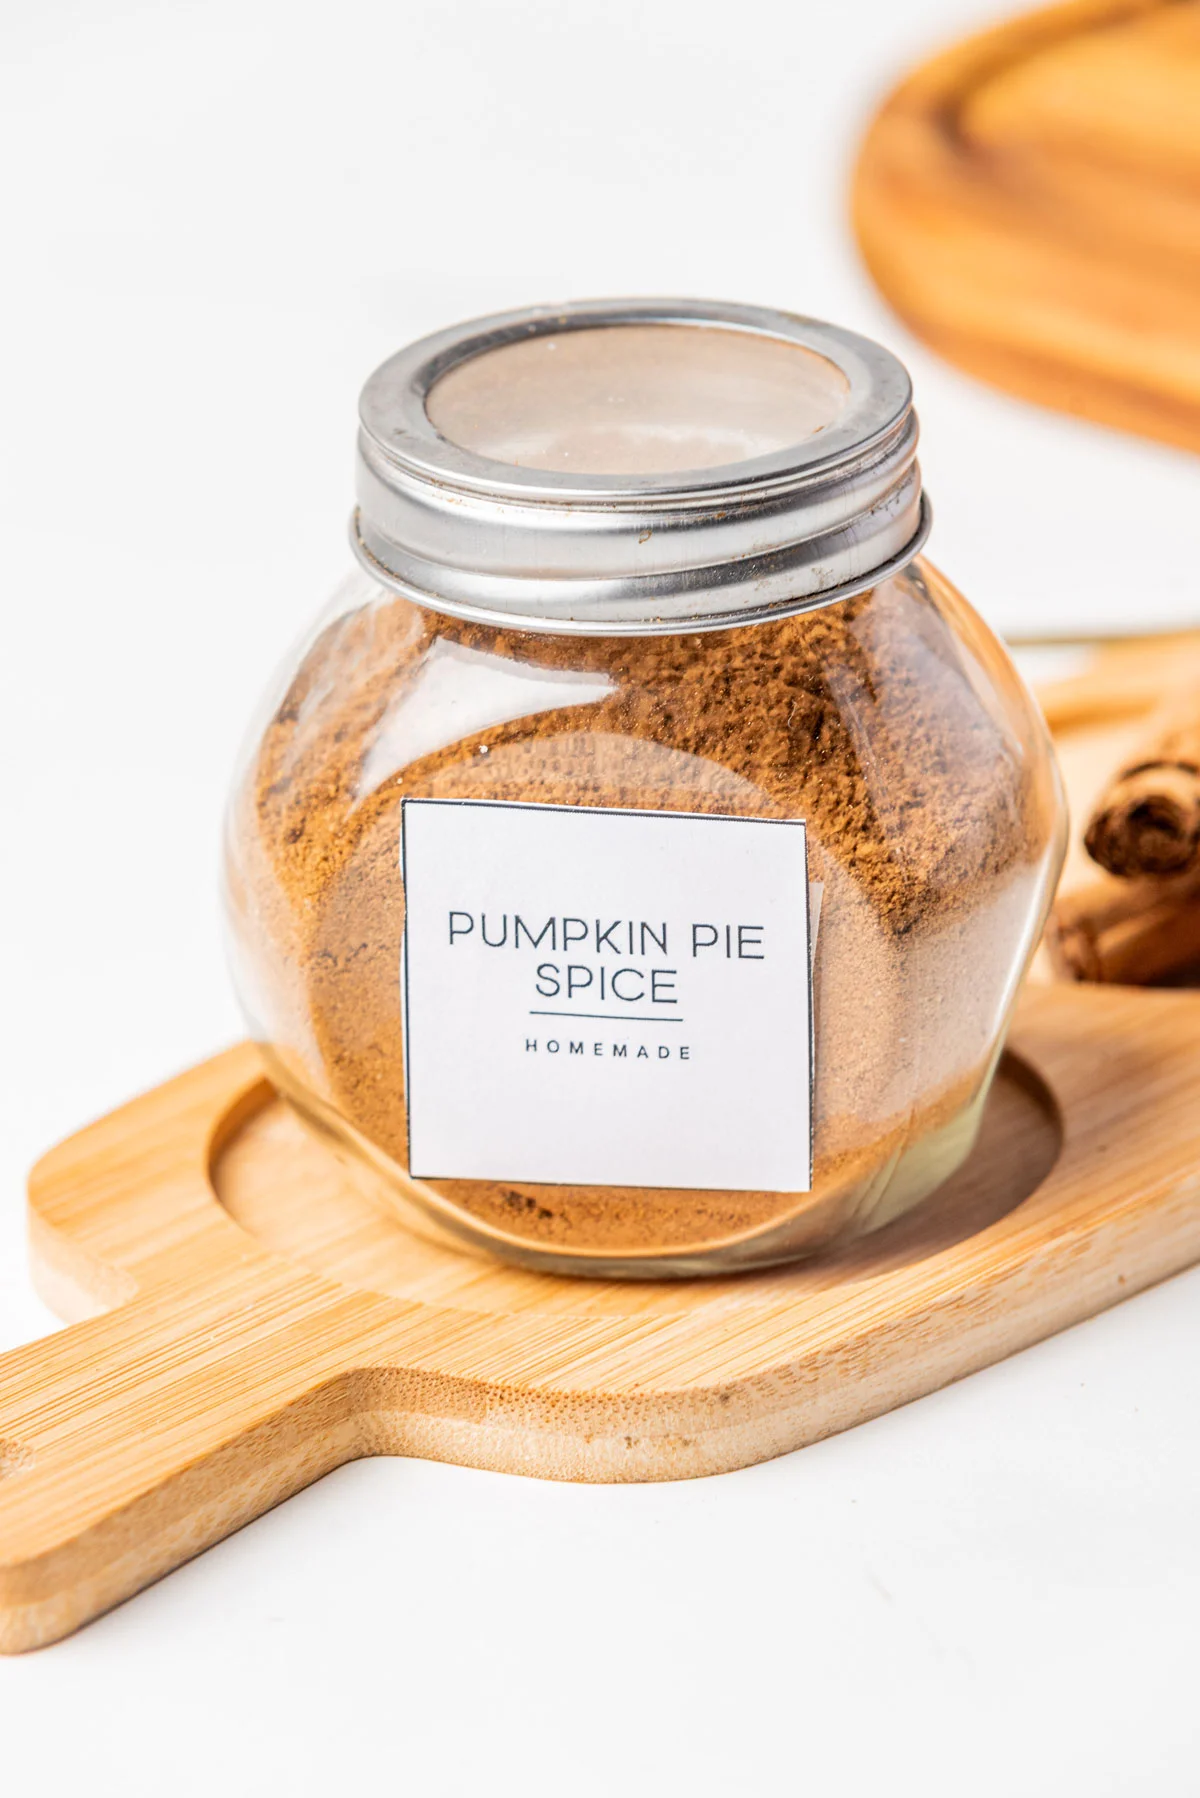 Homemade Pumpkin Pie Spice (Easy DIY Recipe) made and stored in a glass jar with a metal screw top lid and label